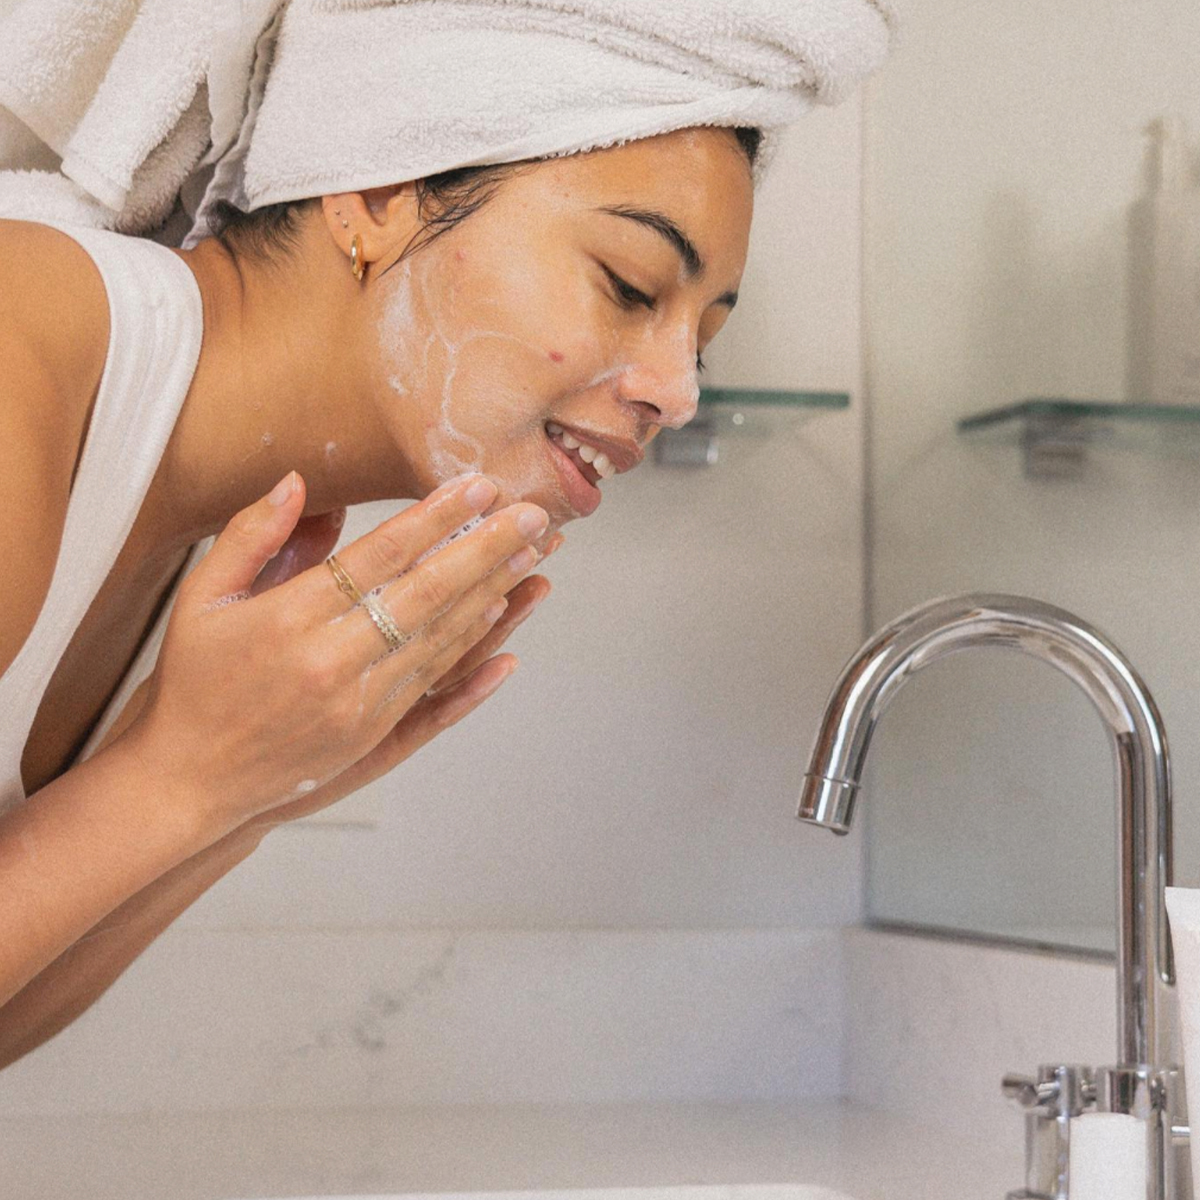 7 Best Face Washes for Acne, According to Experts